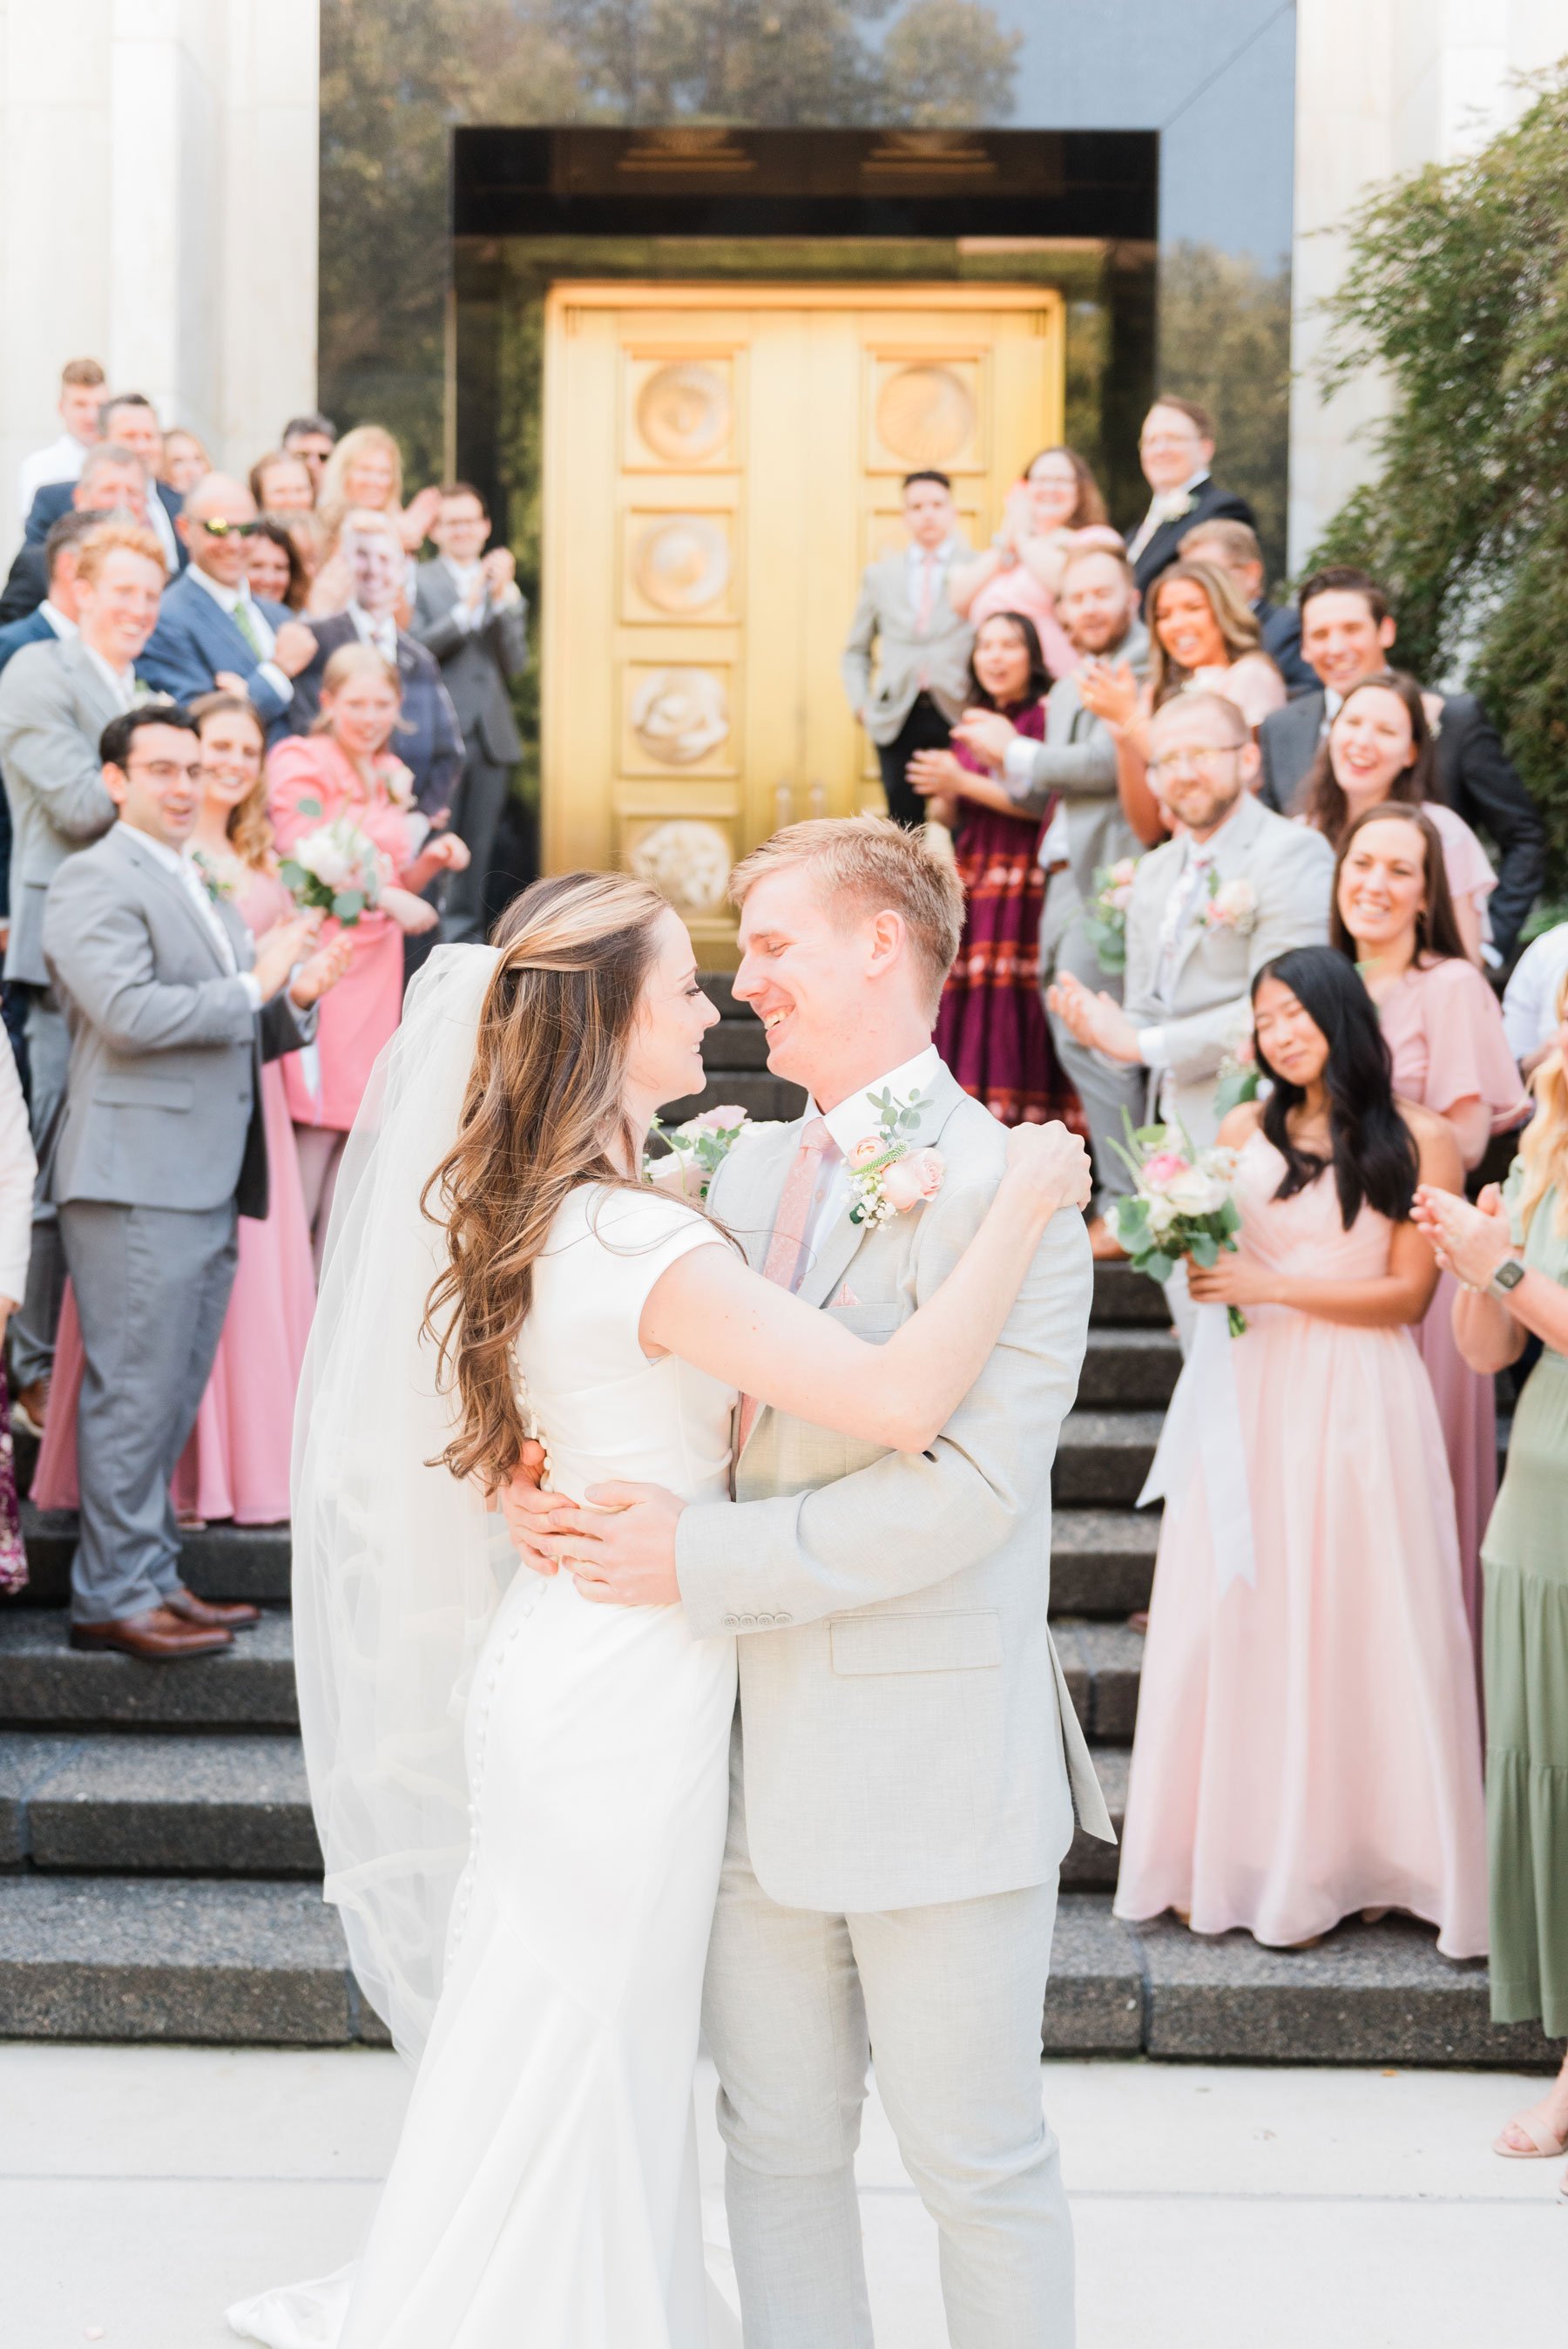    The loved ones of the bride and groom stand for a group photo outside of the temple doors. #washingtondctemple #washingtondcweddingphotographer #dcwedding #pinkwedding #ldsweddingphotographer #pinkweddingbouquet #washingtondctempleexit #eastcoastw